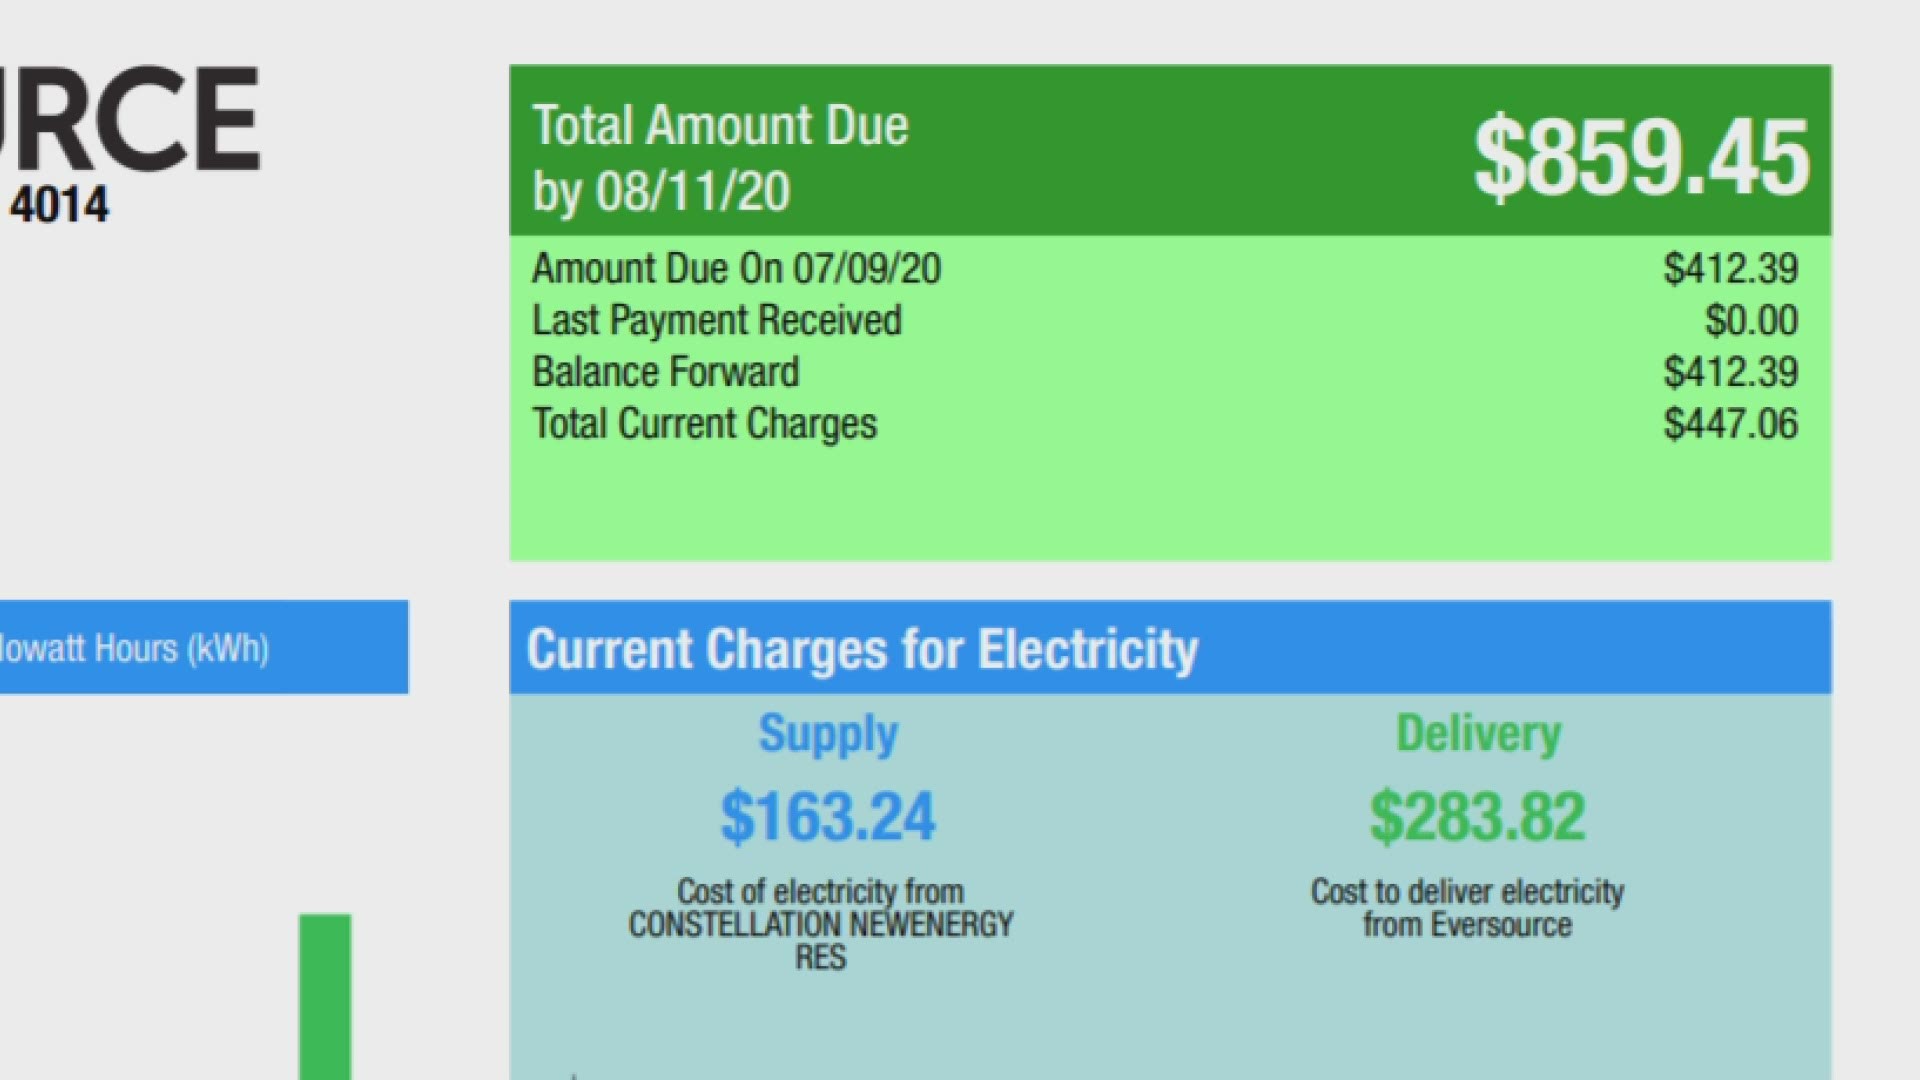 Late last week electric ratepayers began to make their concerns vocal when they noticed a rate increase in their electric bills.